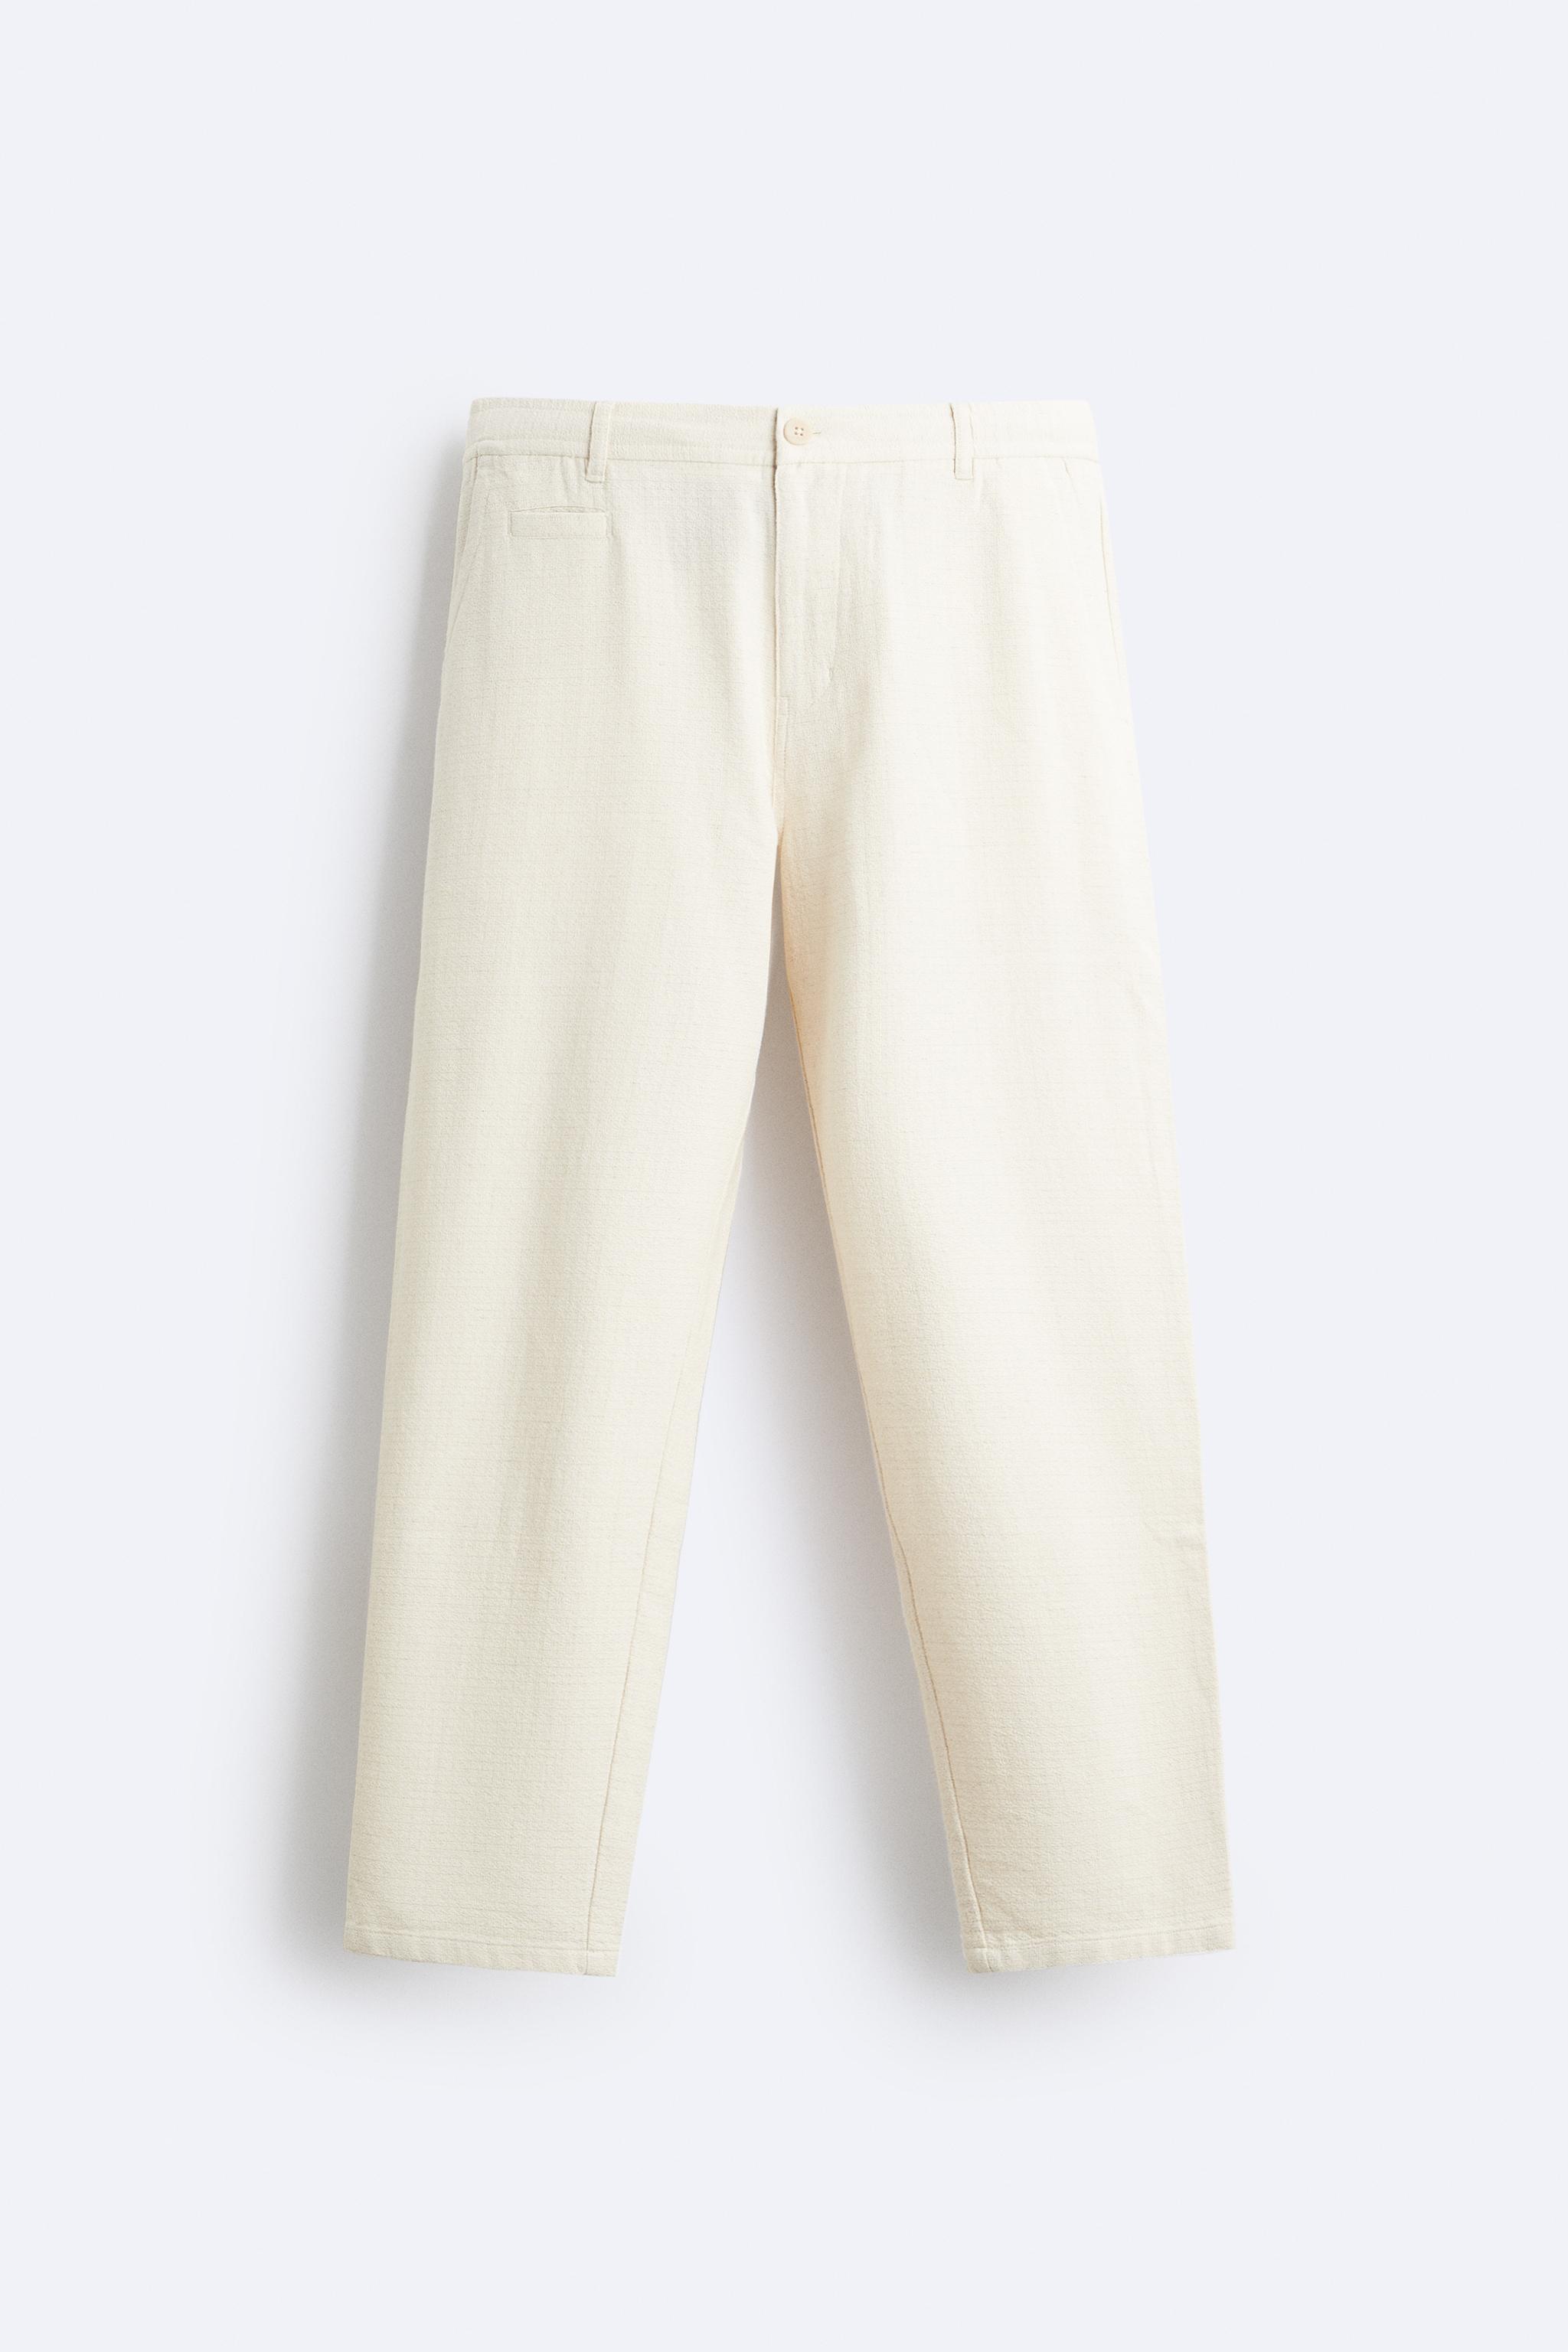 TEXTURED JOGGER WAIST PANTS - Oyster-white